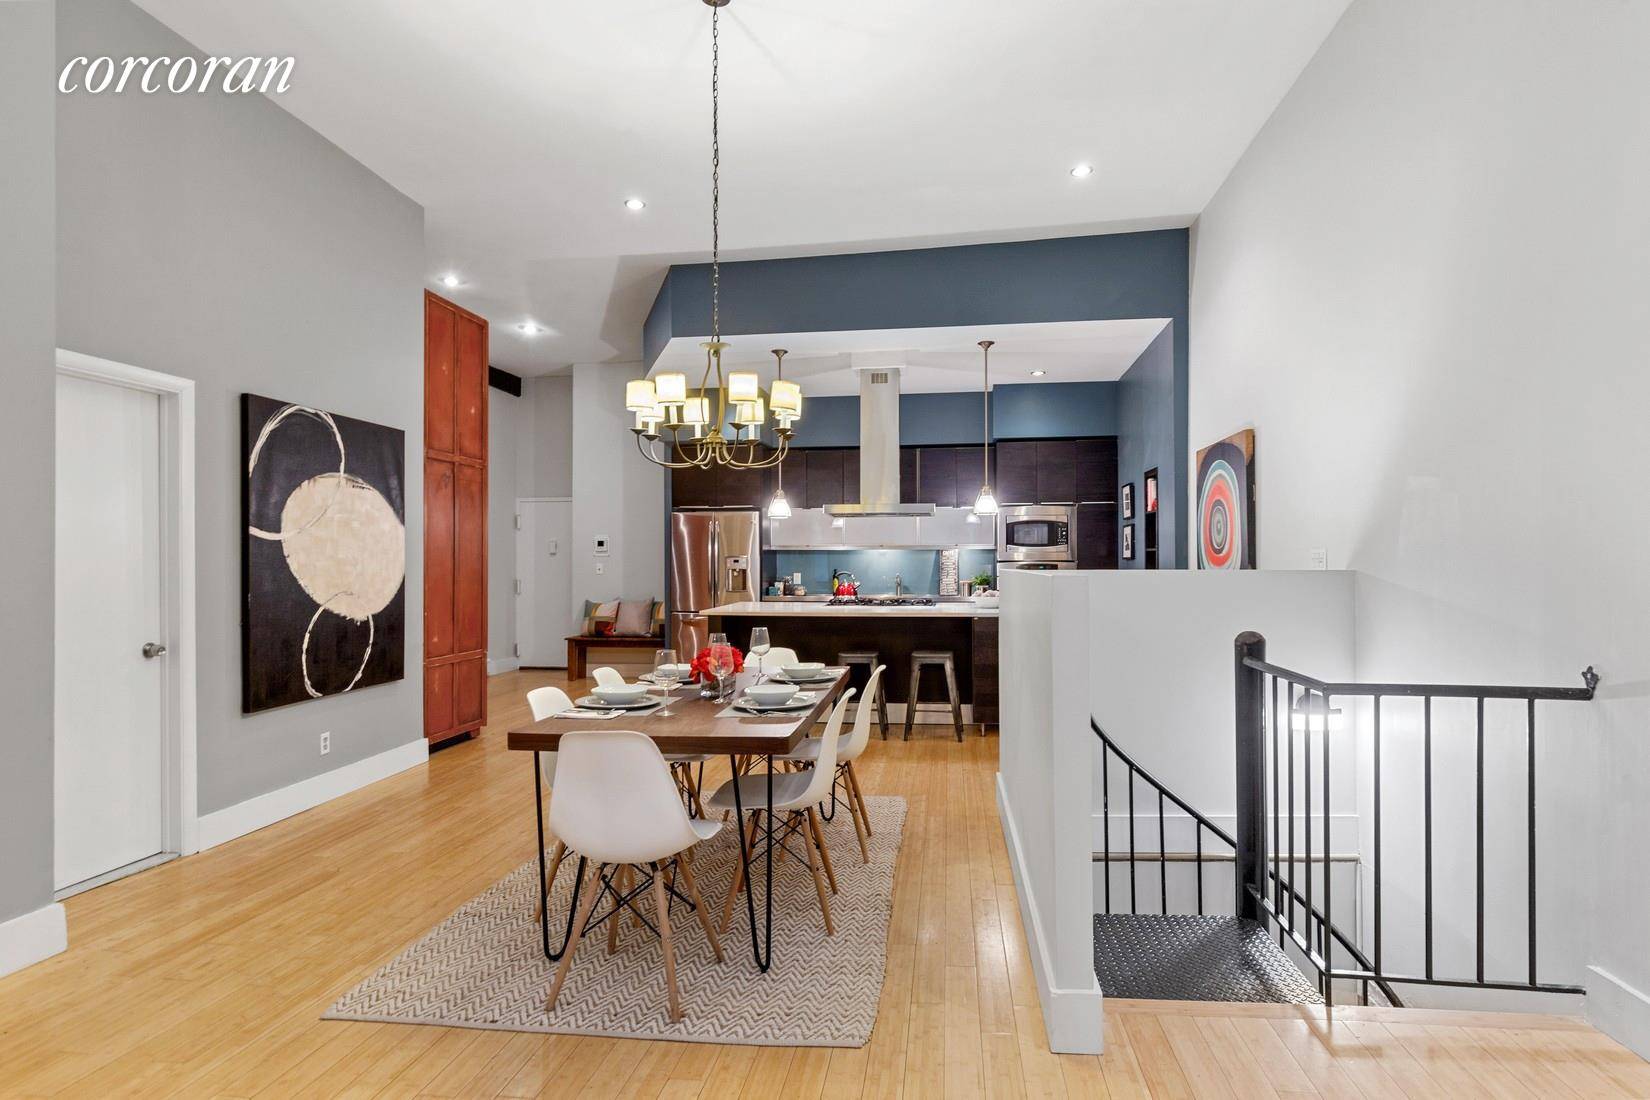 This sprawling and dramatic 2000 square foot duplex CONDO loft features three bedrooms, two baths, soaring 12' ceilings, a WORKING WOODBURNING FIREPLACE and a layout that will knock your socks ...